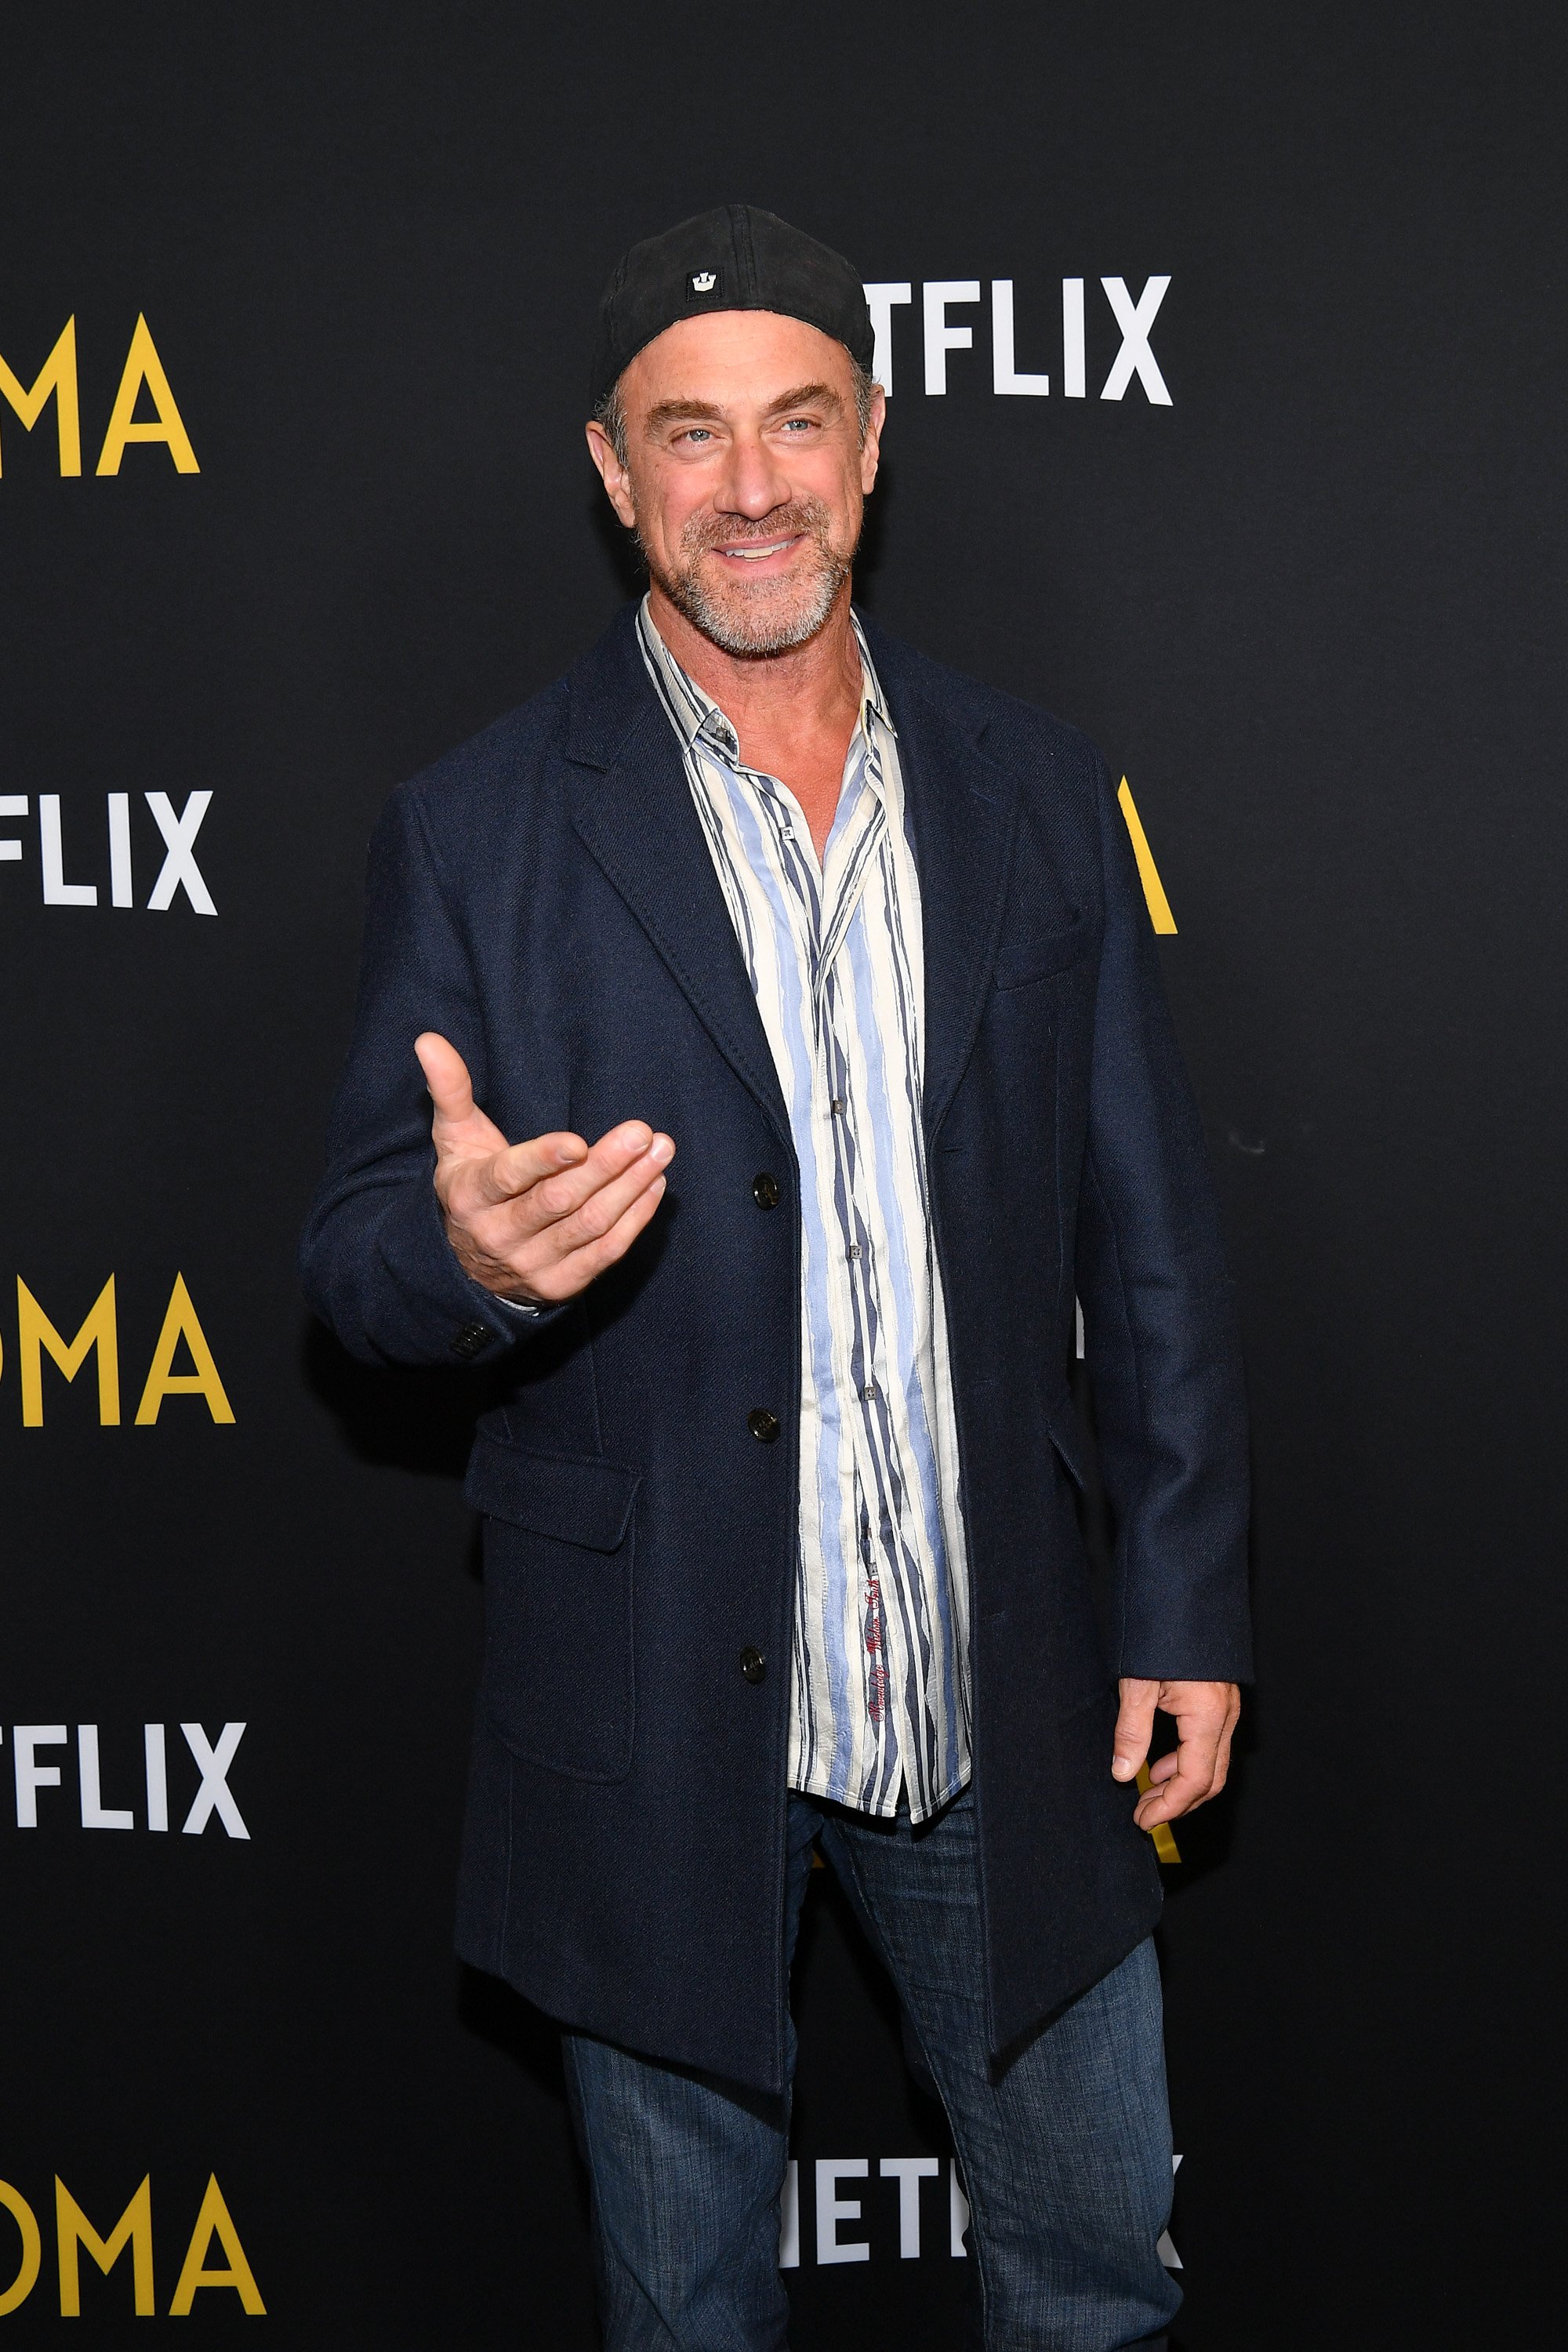 Christopher Meloni attends the "Roma" New York screening at DGA Theater on November 27, 2018 | Photo: Getty Images